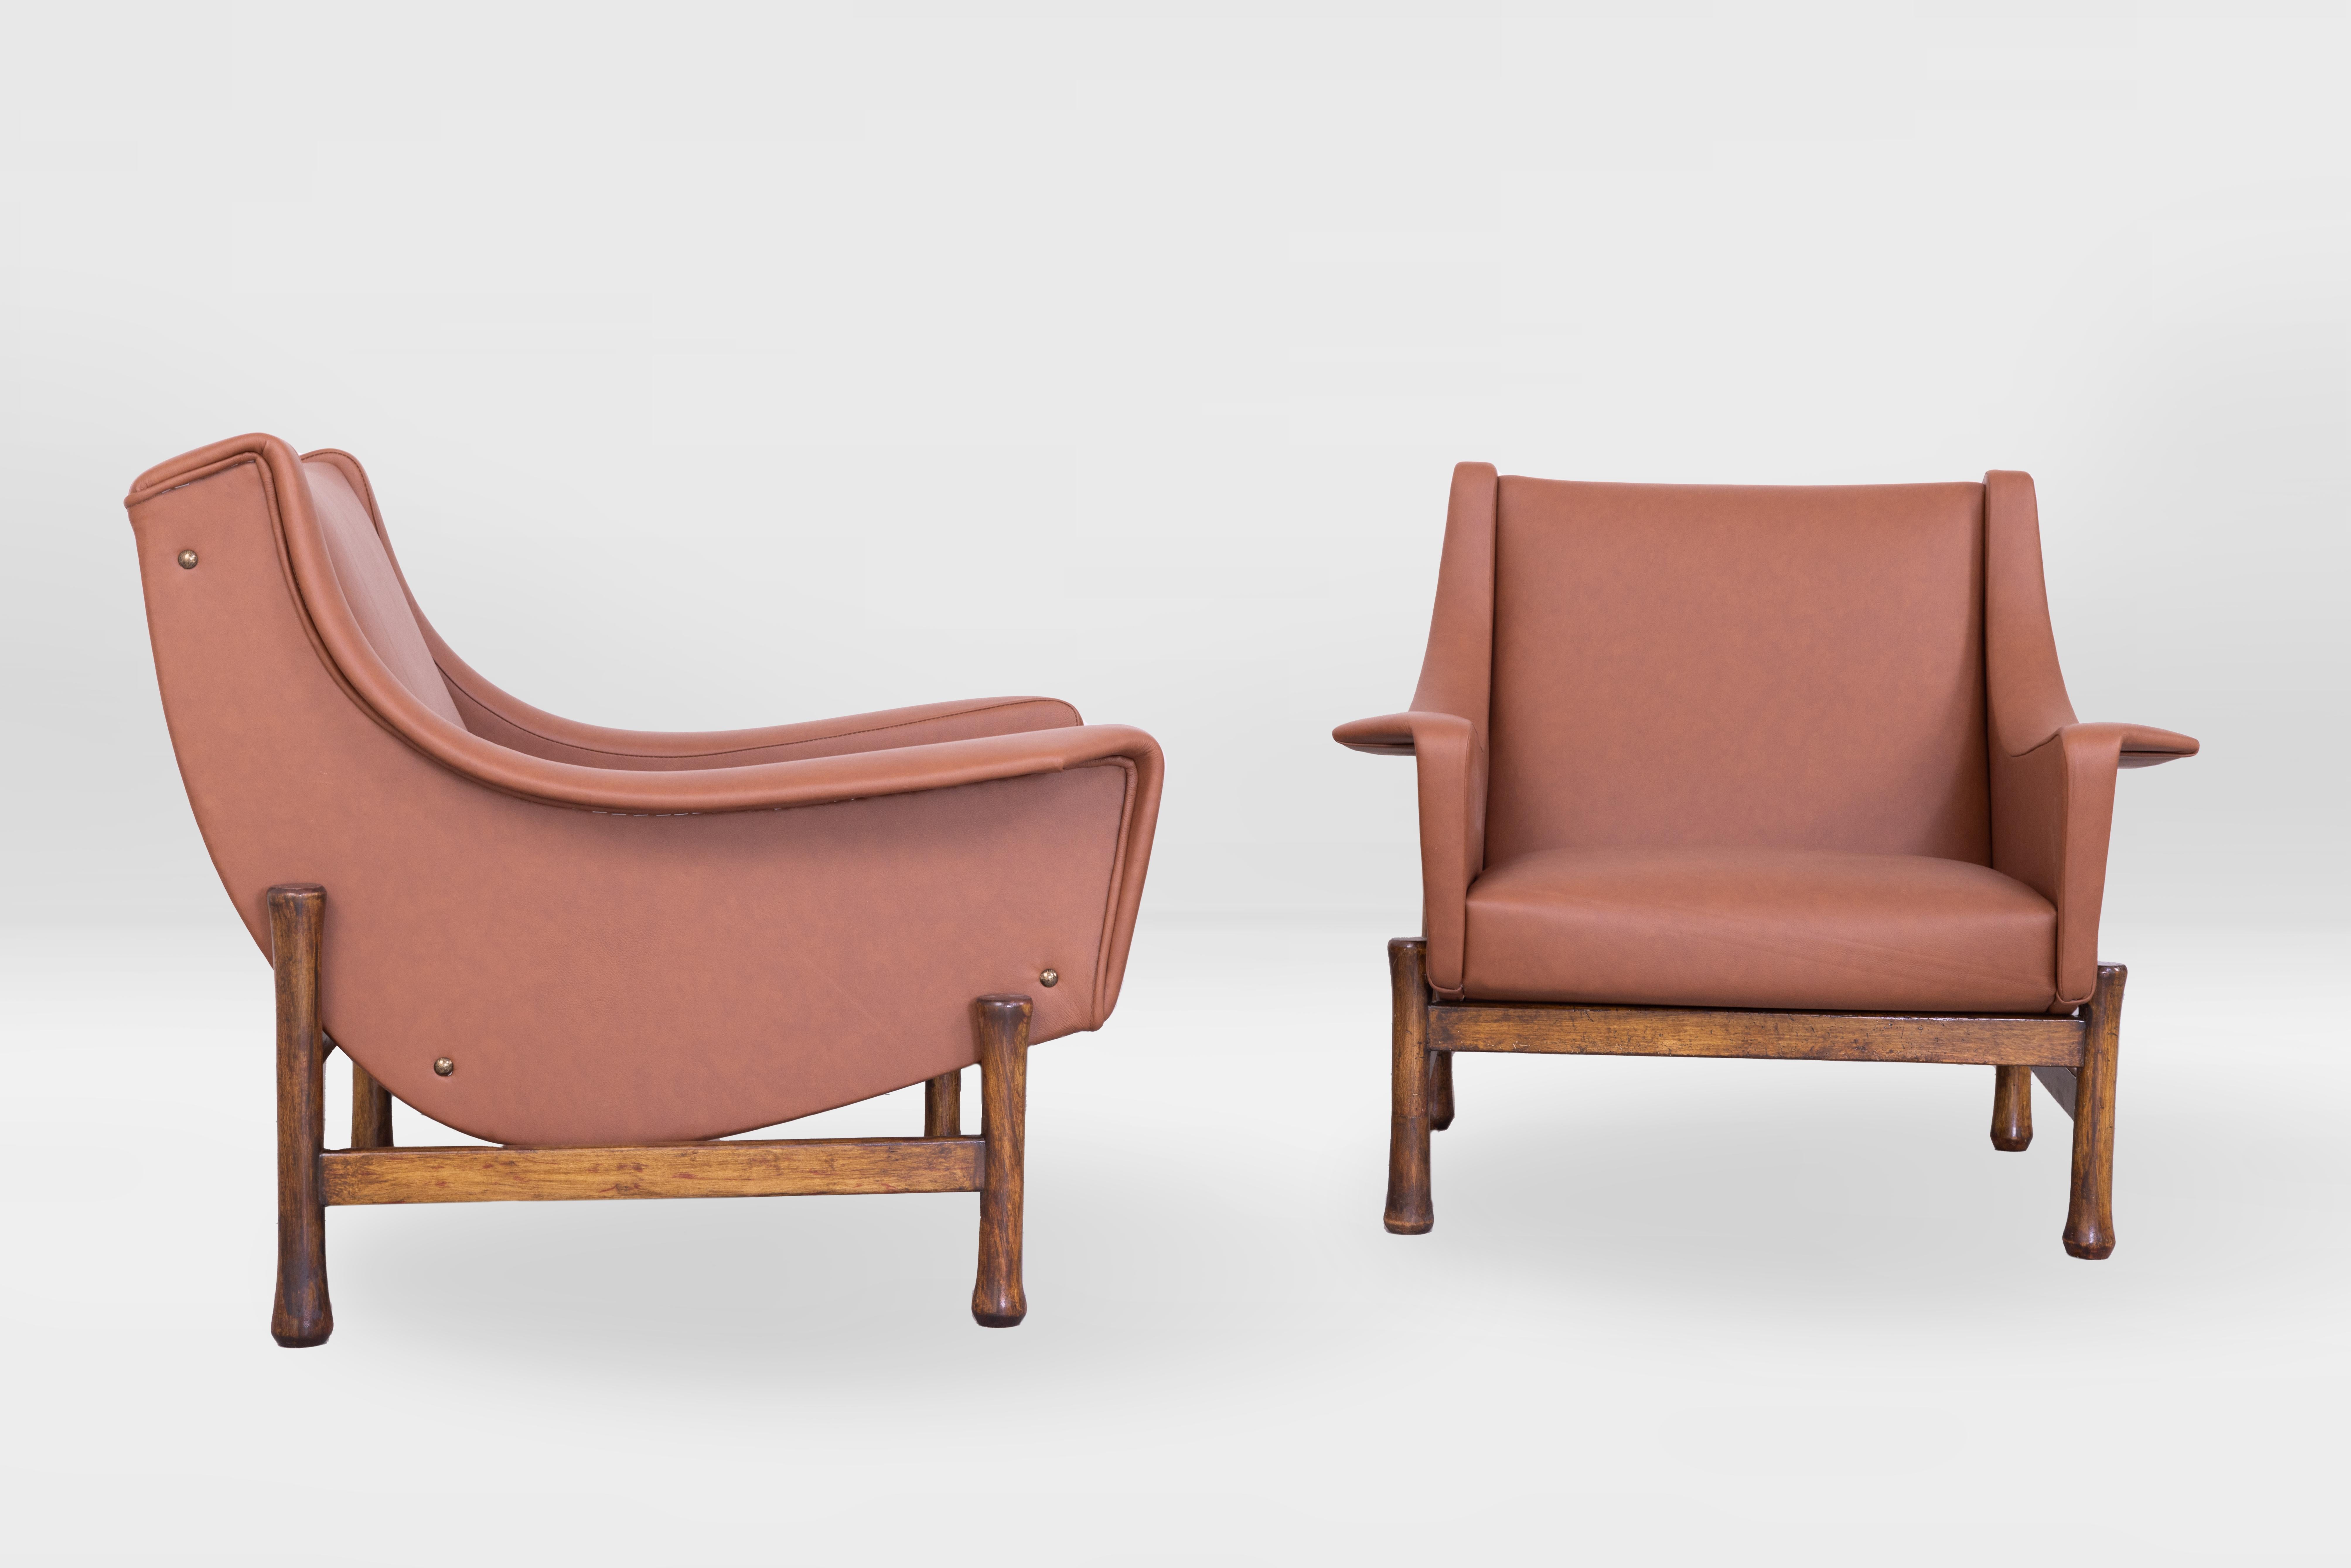 Rare pair of lounge chairs by Tobia Scarpa for Formanova, Italy 1960s, solid walnut base, newly reupholstered in high-end Italian leather.
  